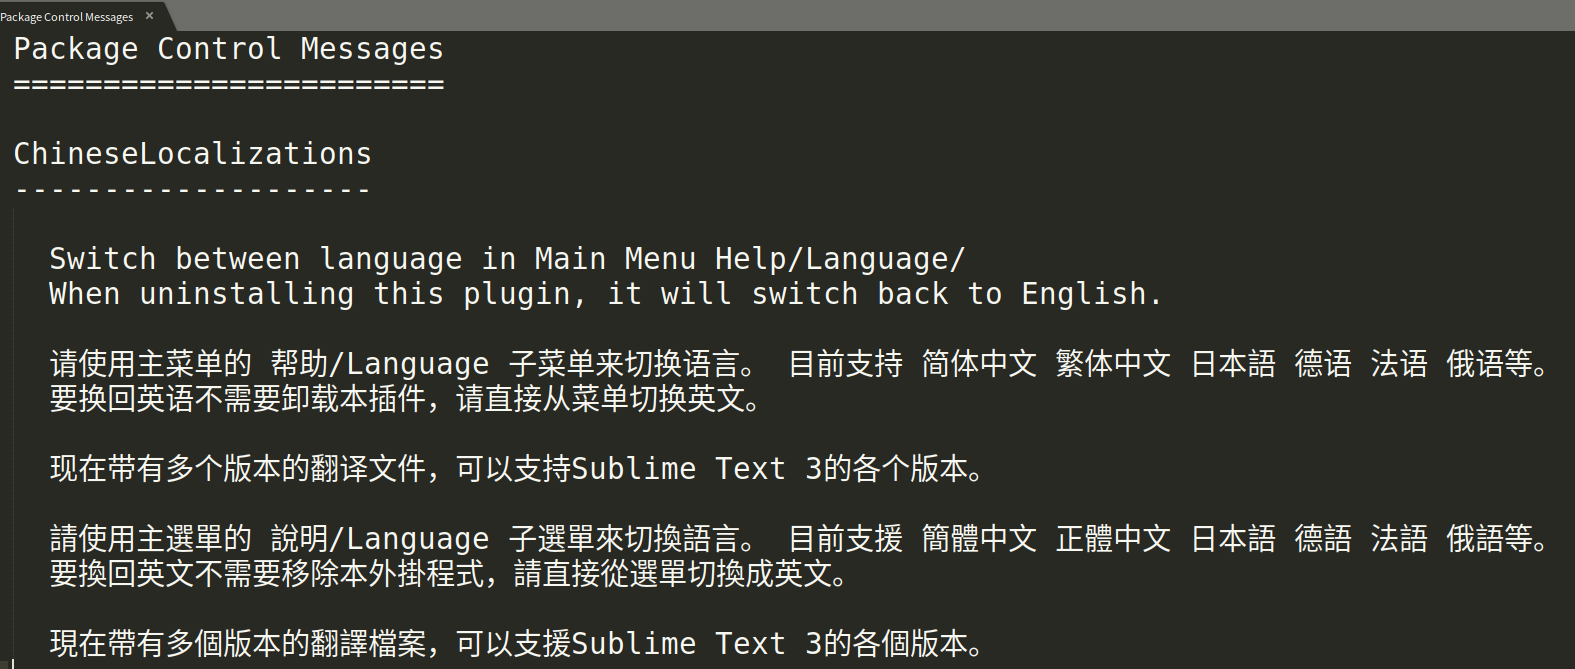 Sublime Text3的Package Control安装教程、汉化方法、插件安装、快捷方式设定，及报错解决There Are No Packages Available For Installation第7张